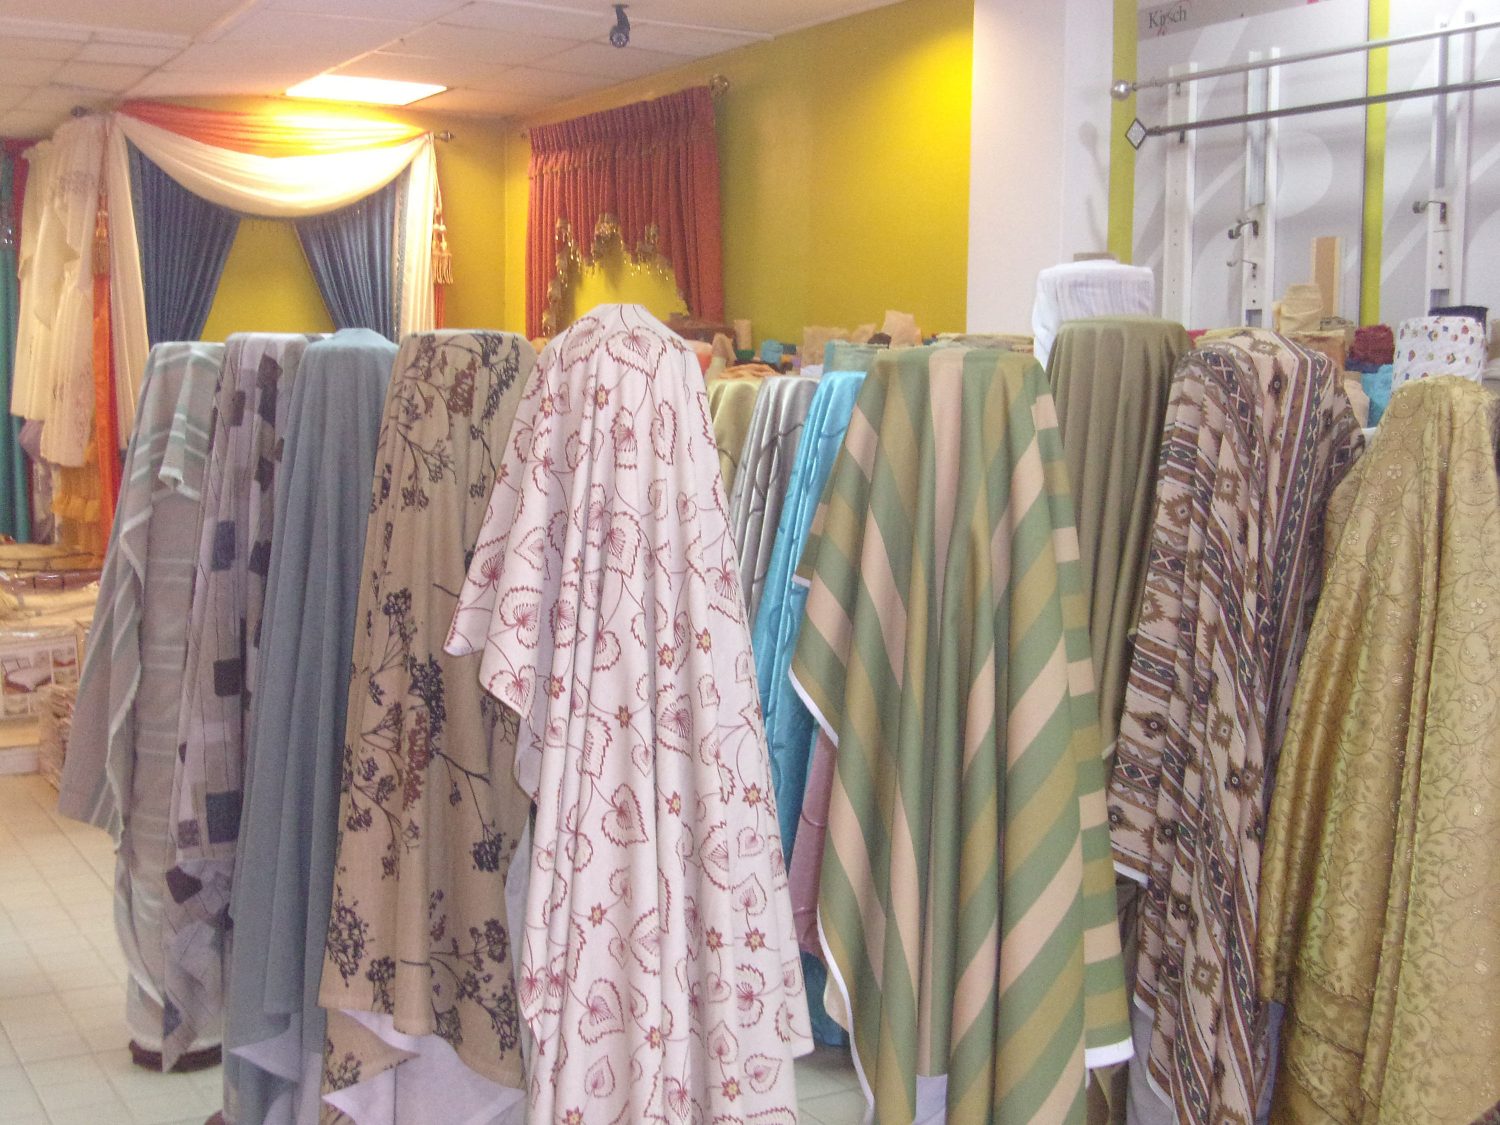  Curtain material on sale (Stabroek News’ file photo)
